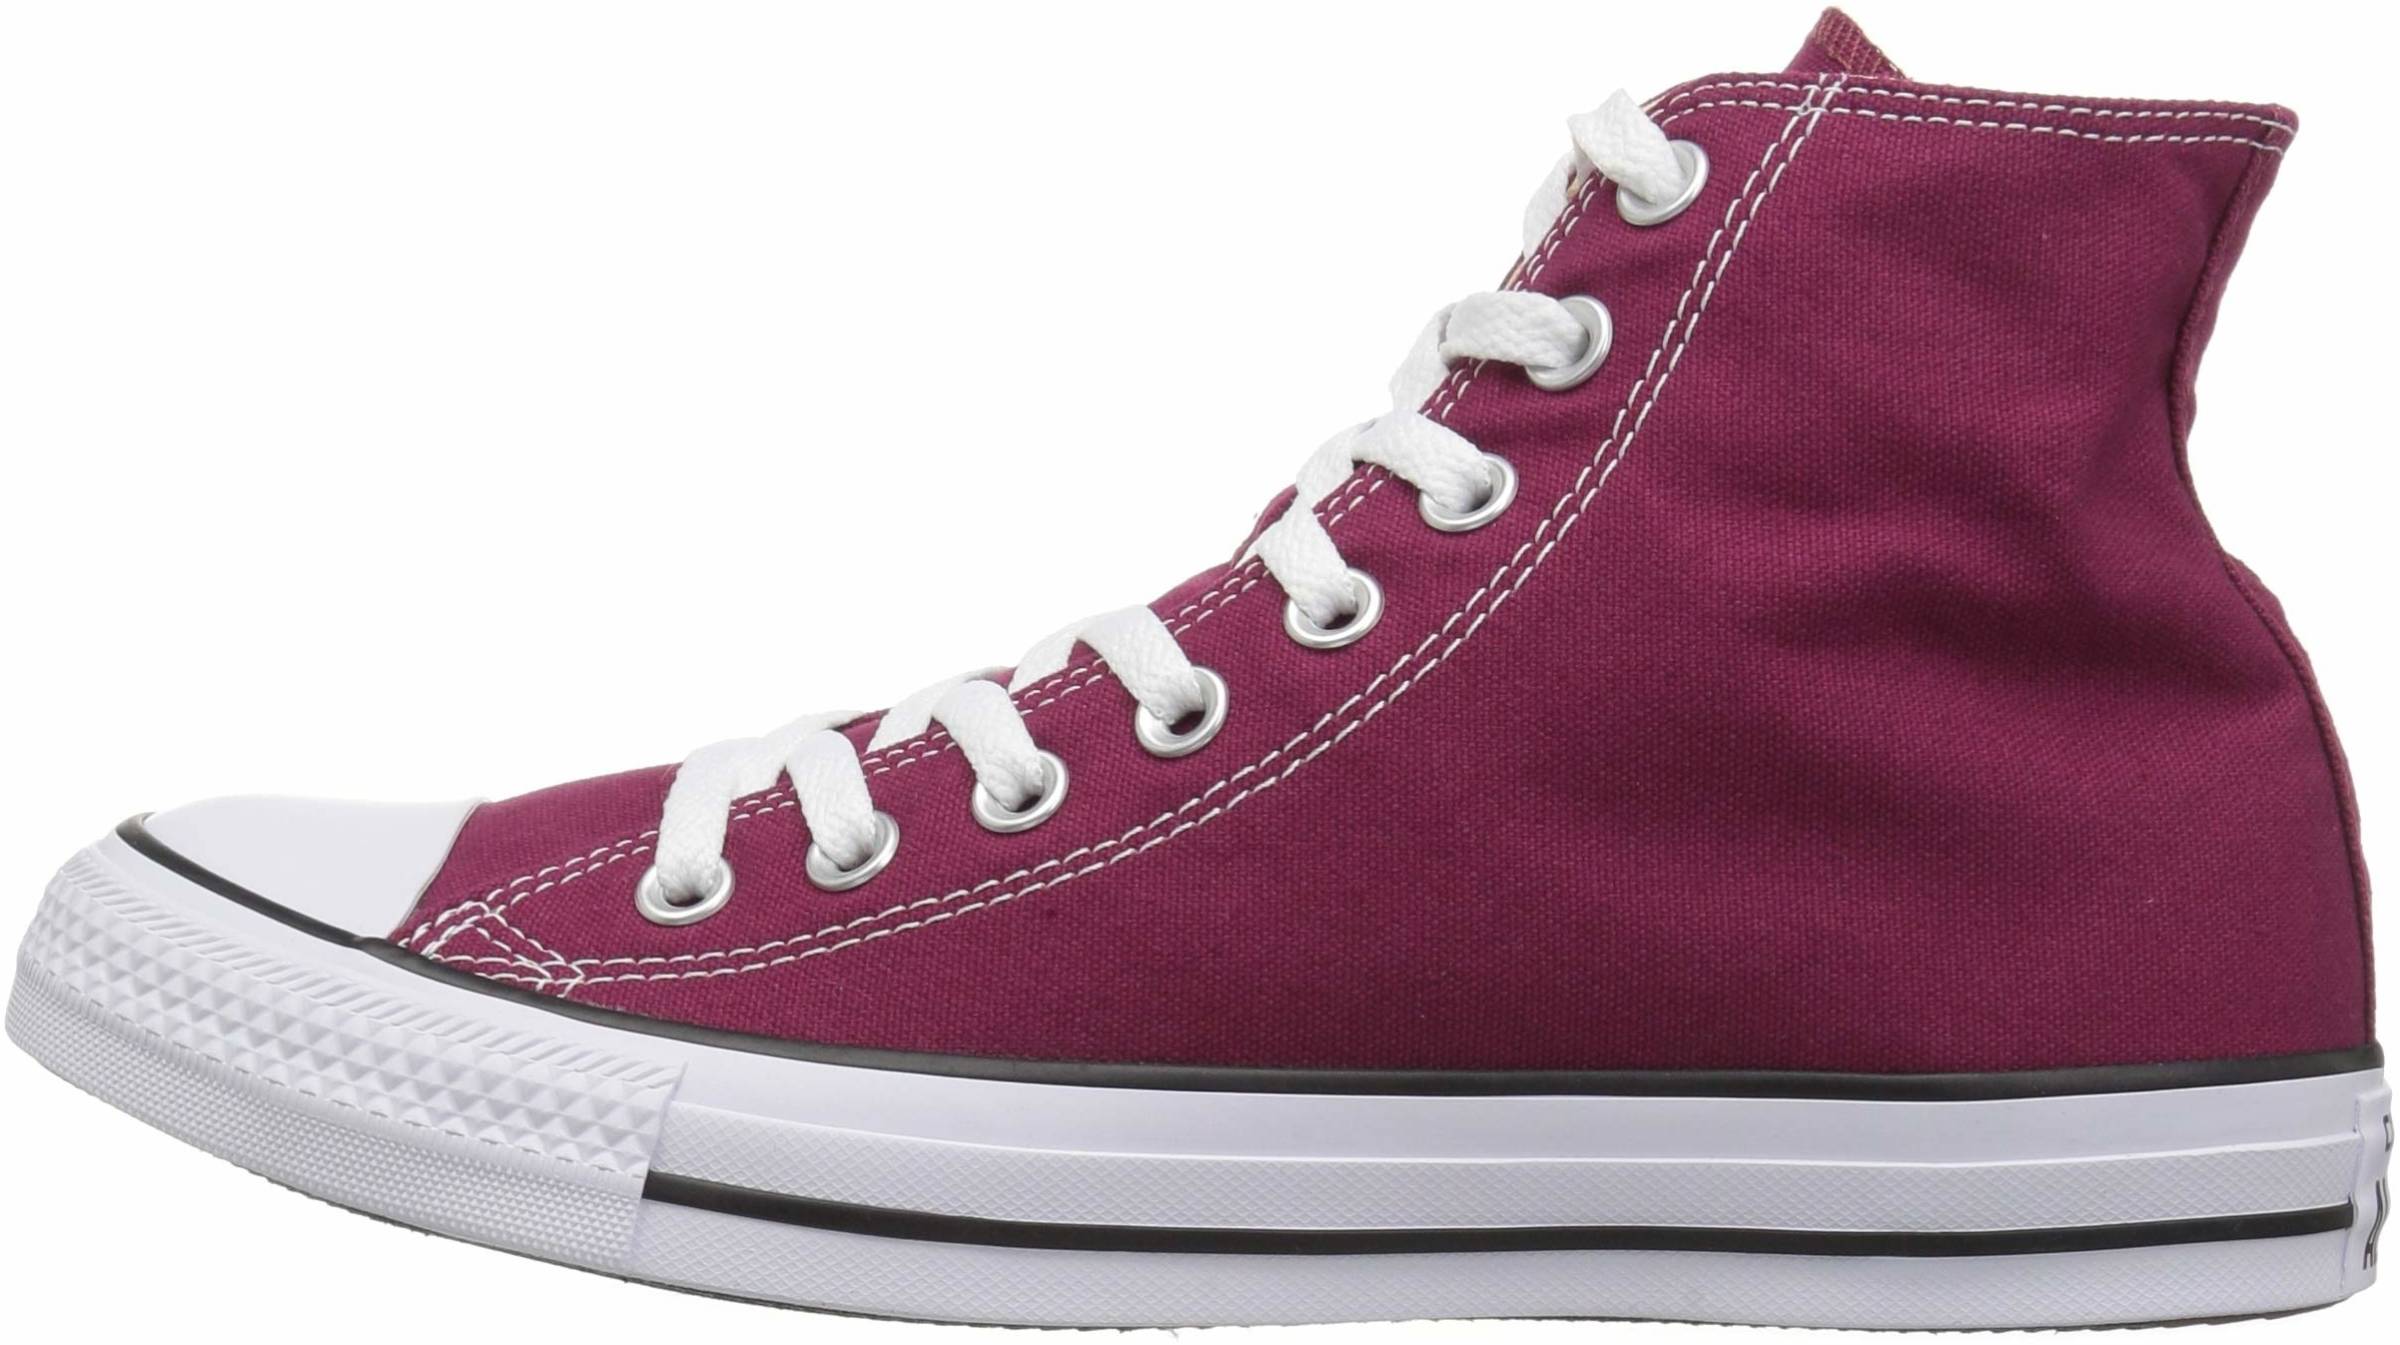 Converse High Tops for Spring